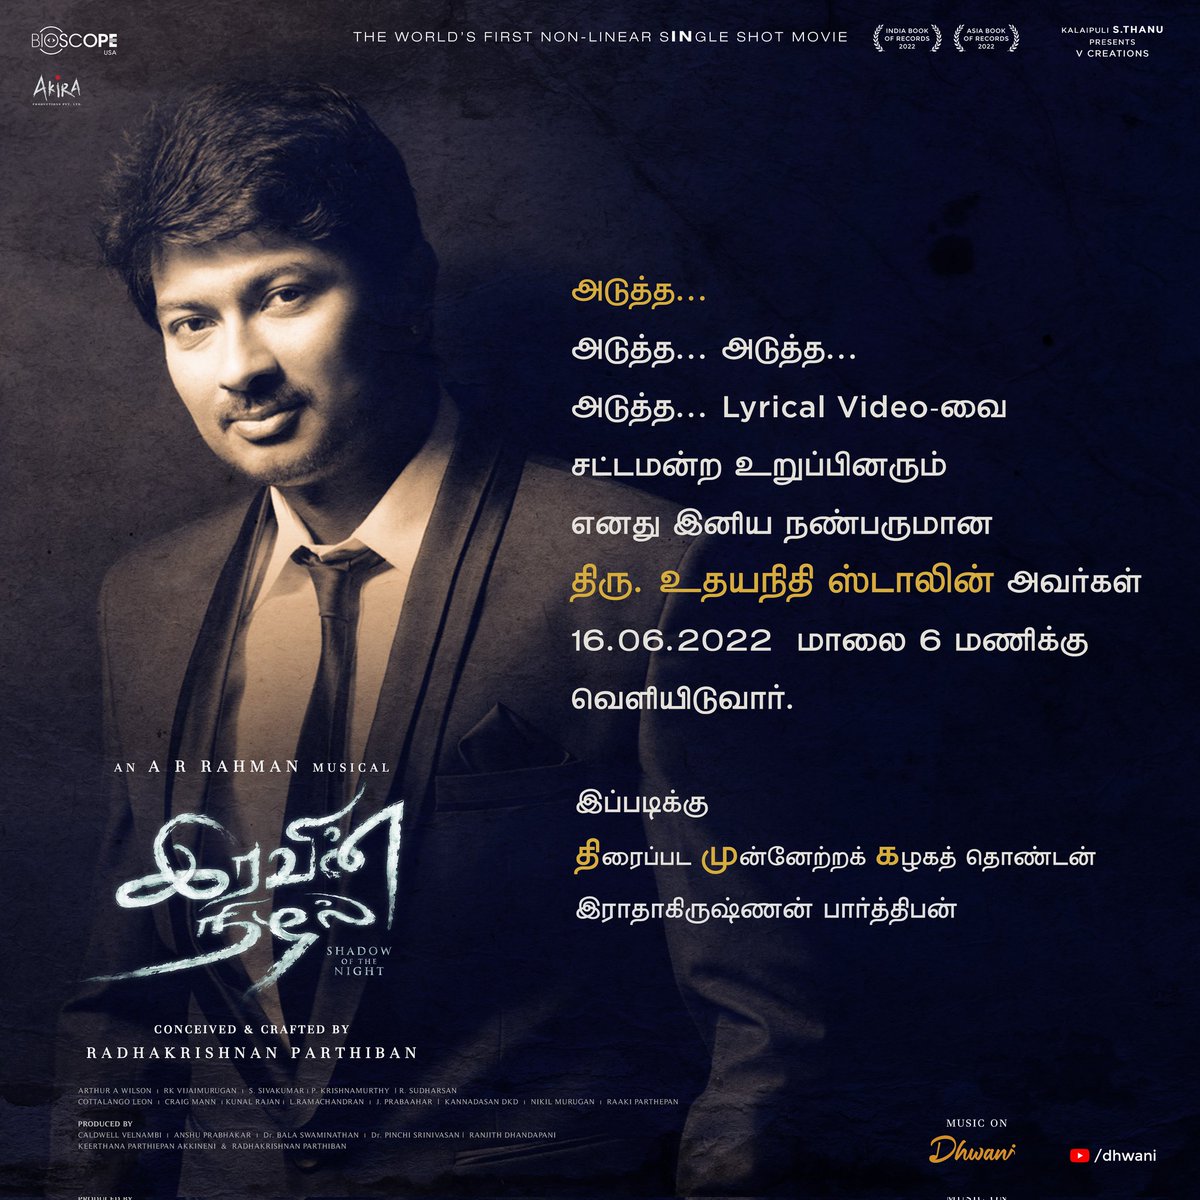 Actor-producer-MLA @udhaystalin will release the next lyric video from #IravinNizhal on 16 June at 6 pm

An @arrahman Musical

Conceived and crafted by @rparthiepan

#இரவின்நிழல்